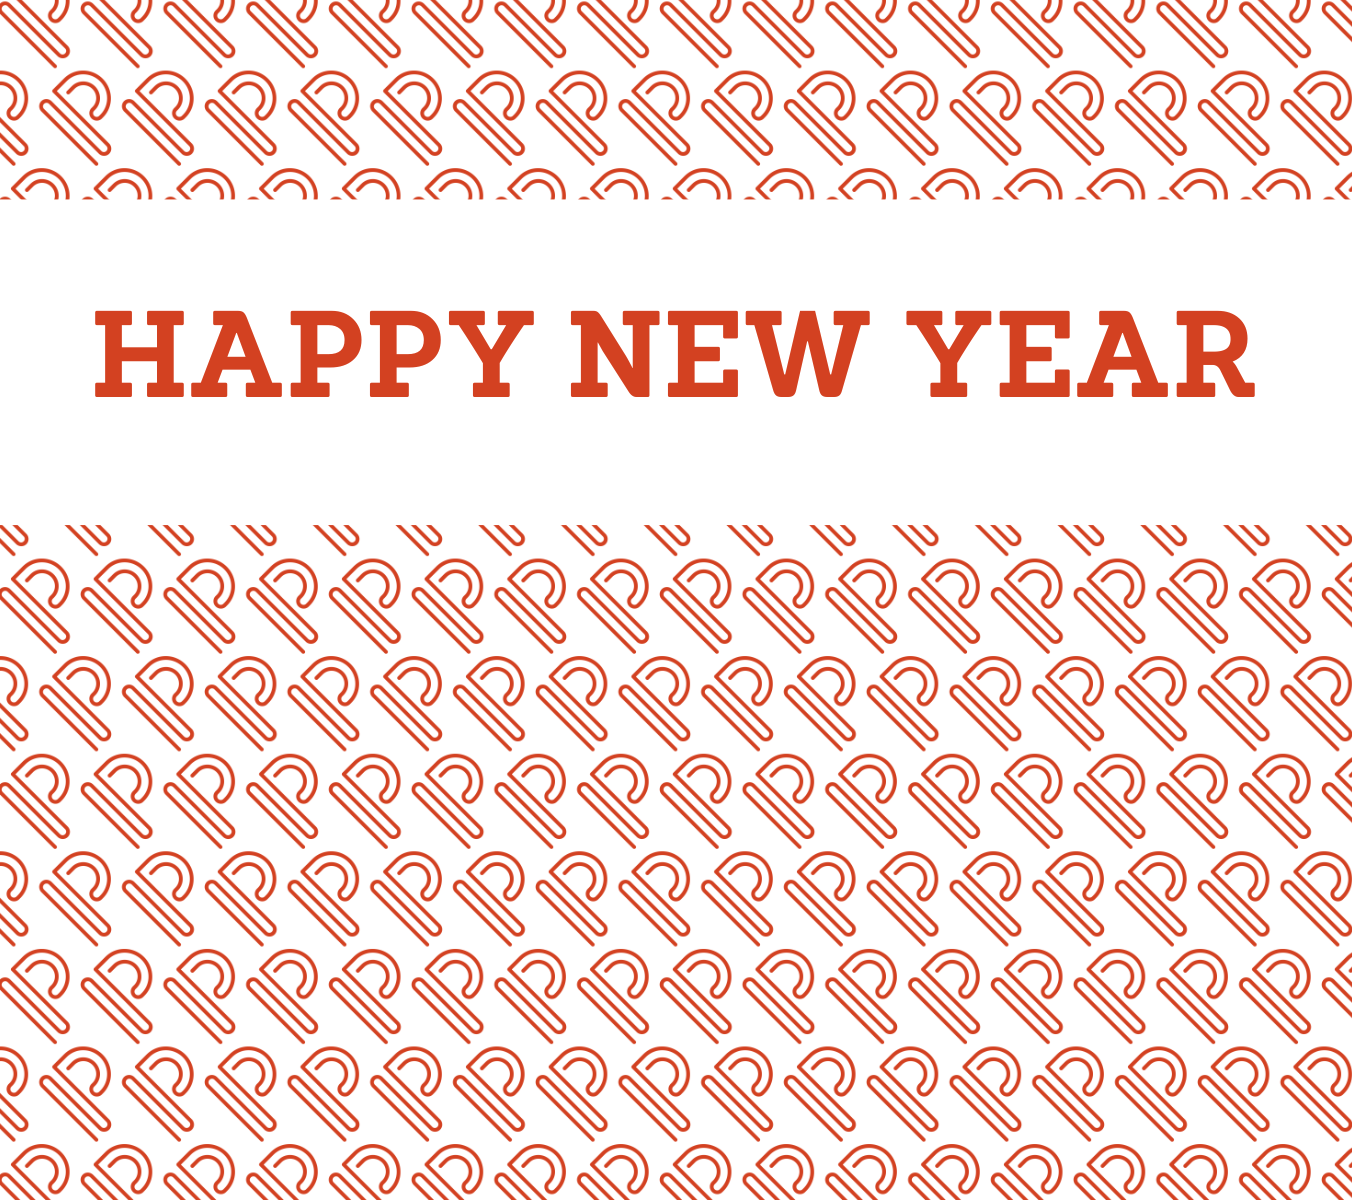 Happy New Year from Powertherm!